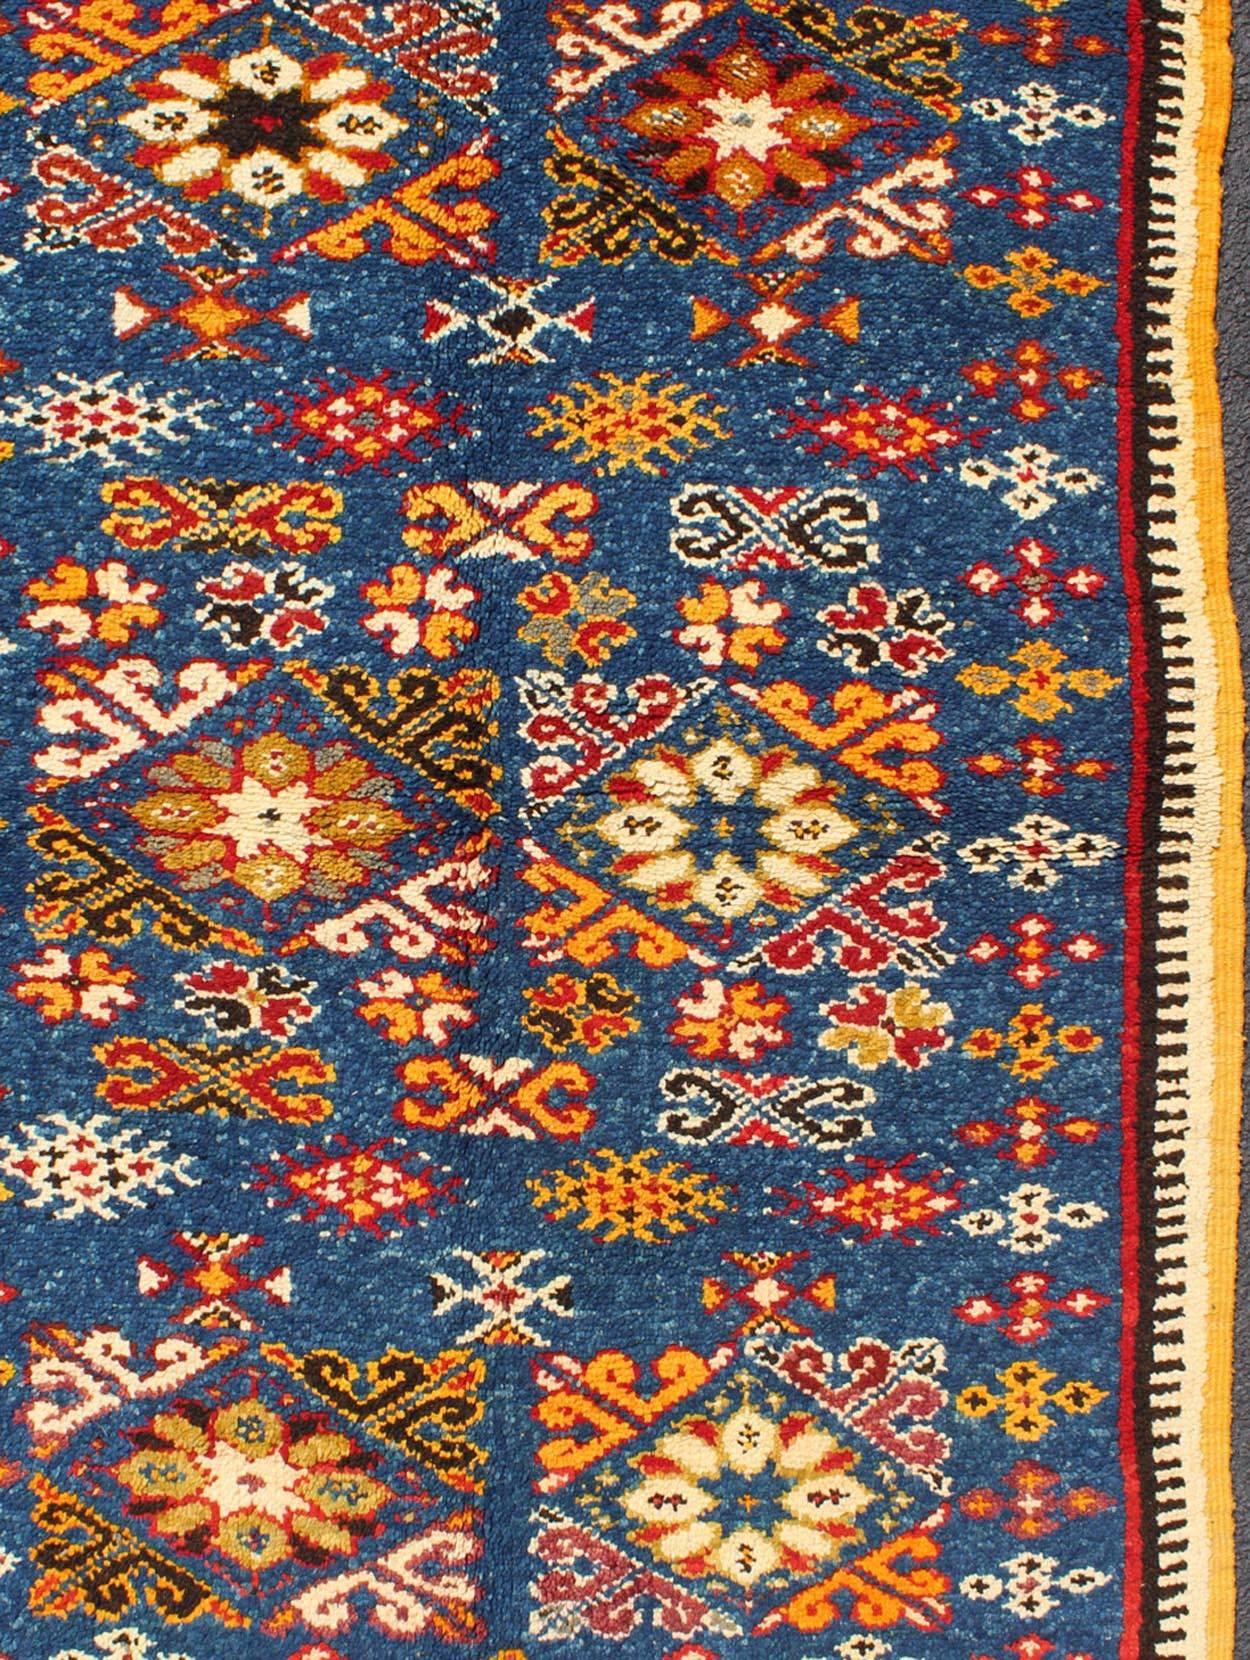 Tribal Vintage Moroccan Rug with Bright Blue Field and Colorful Geometric Motifs